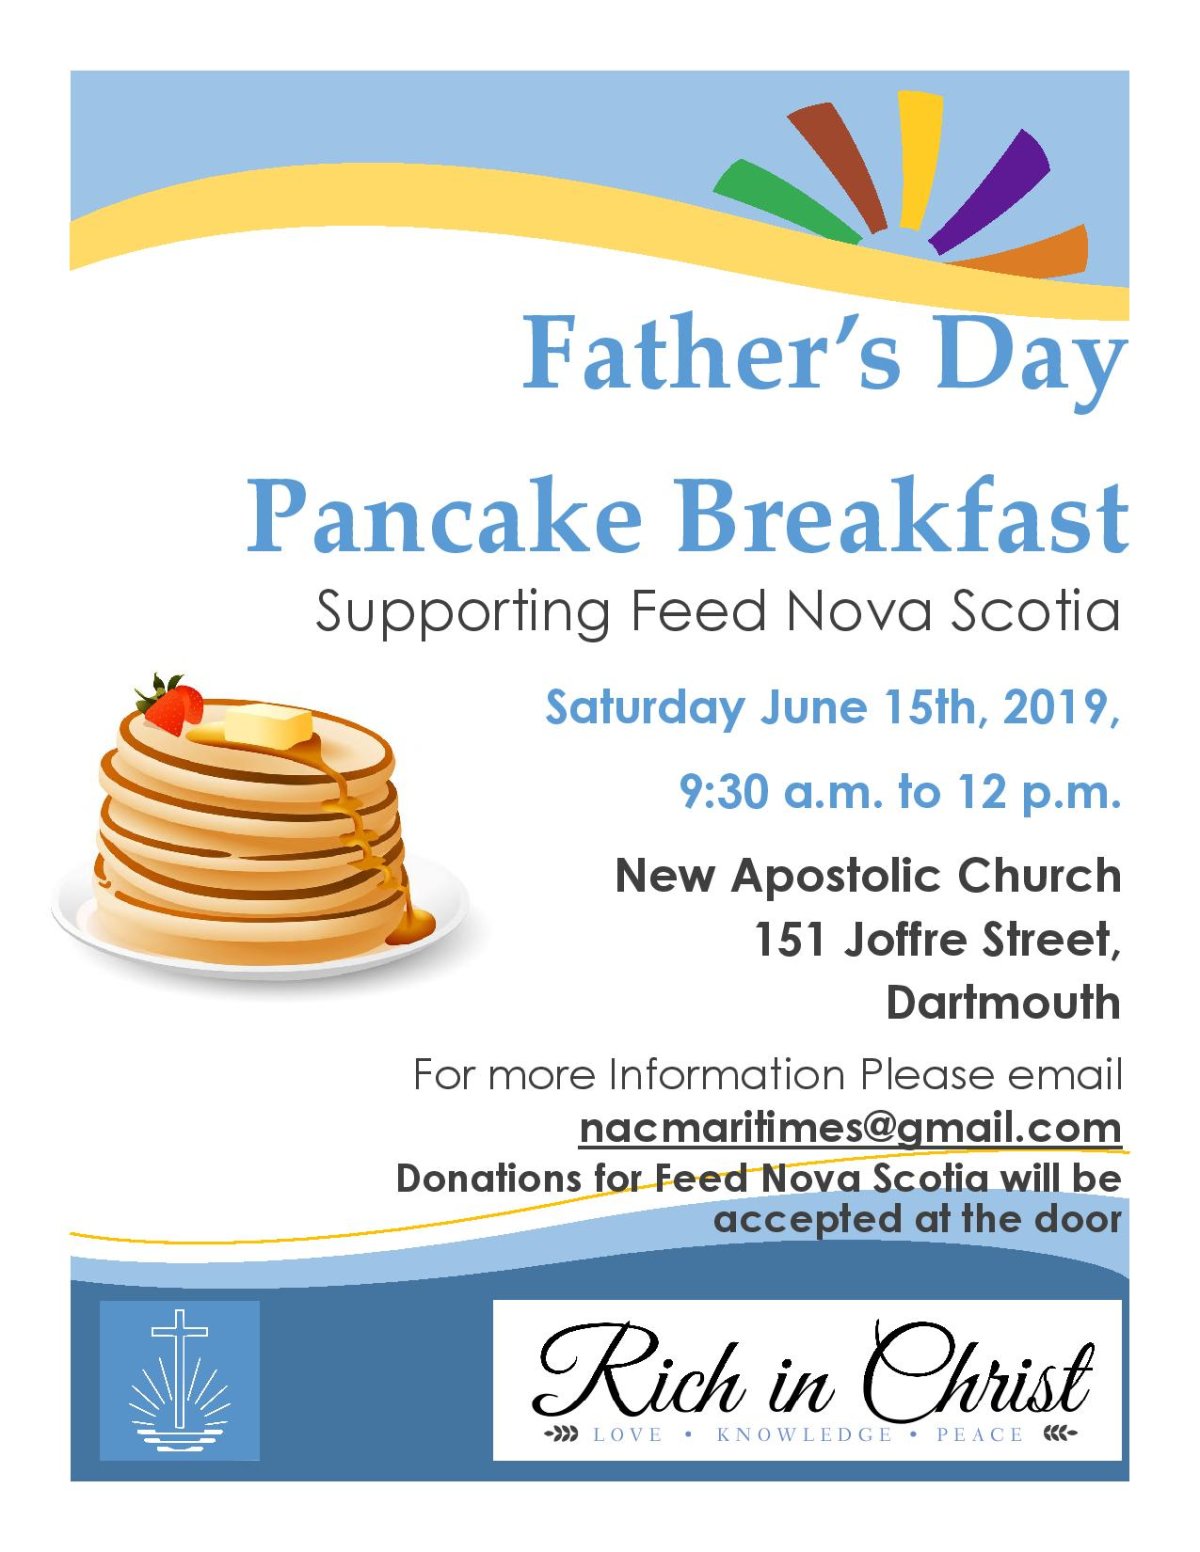 Father’s Day Pancake Breakfast Supporting Feed Nova Scotia - image